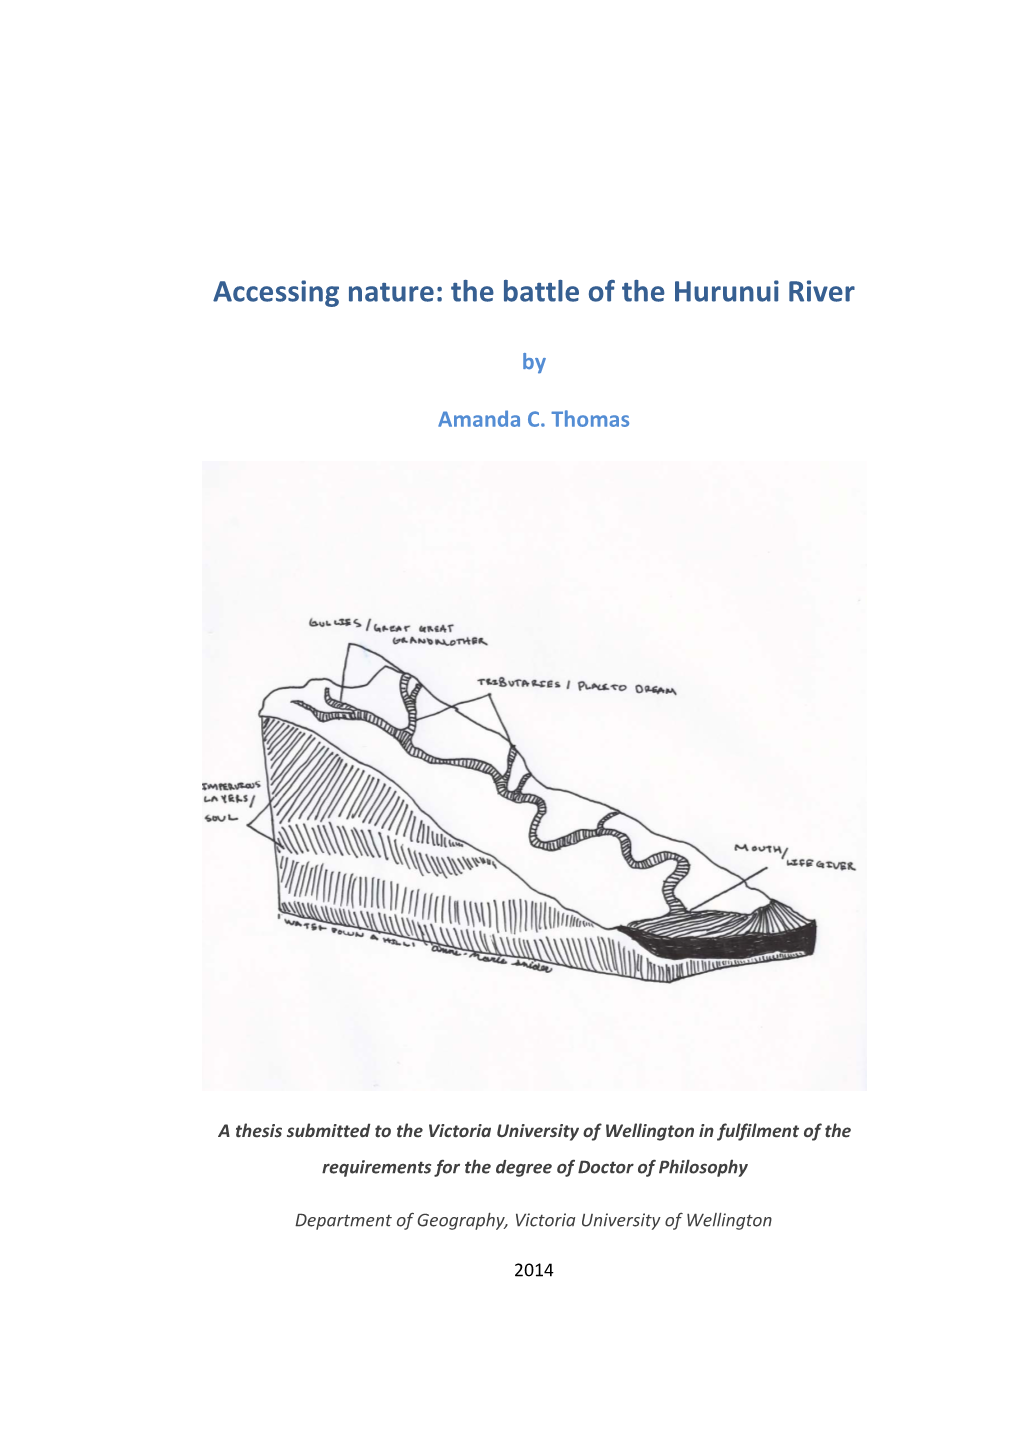 The Battle of the Hurunui River